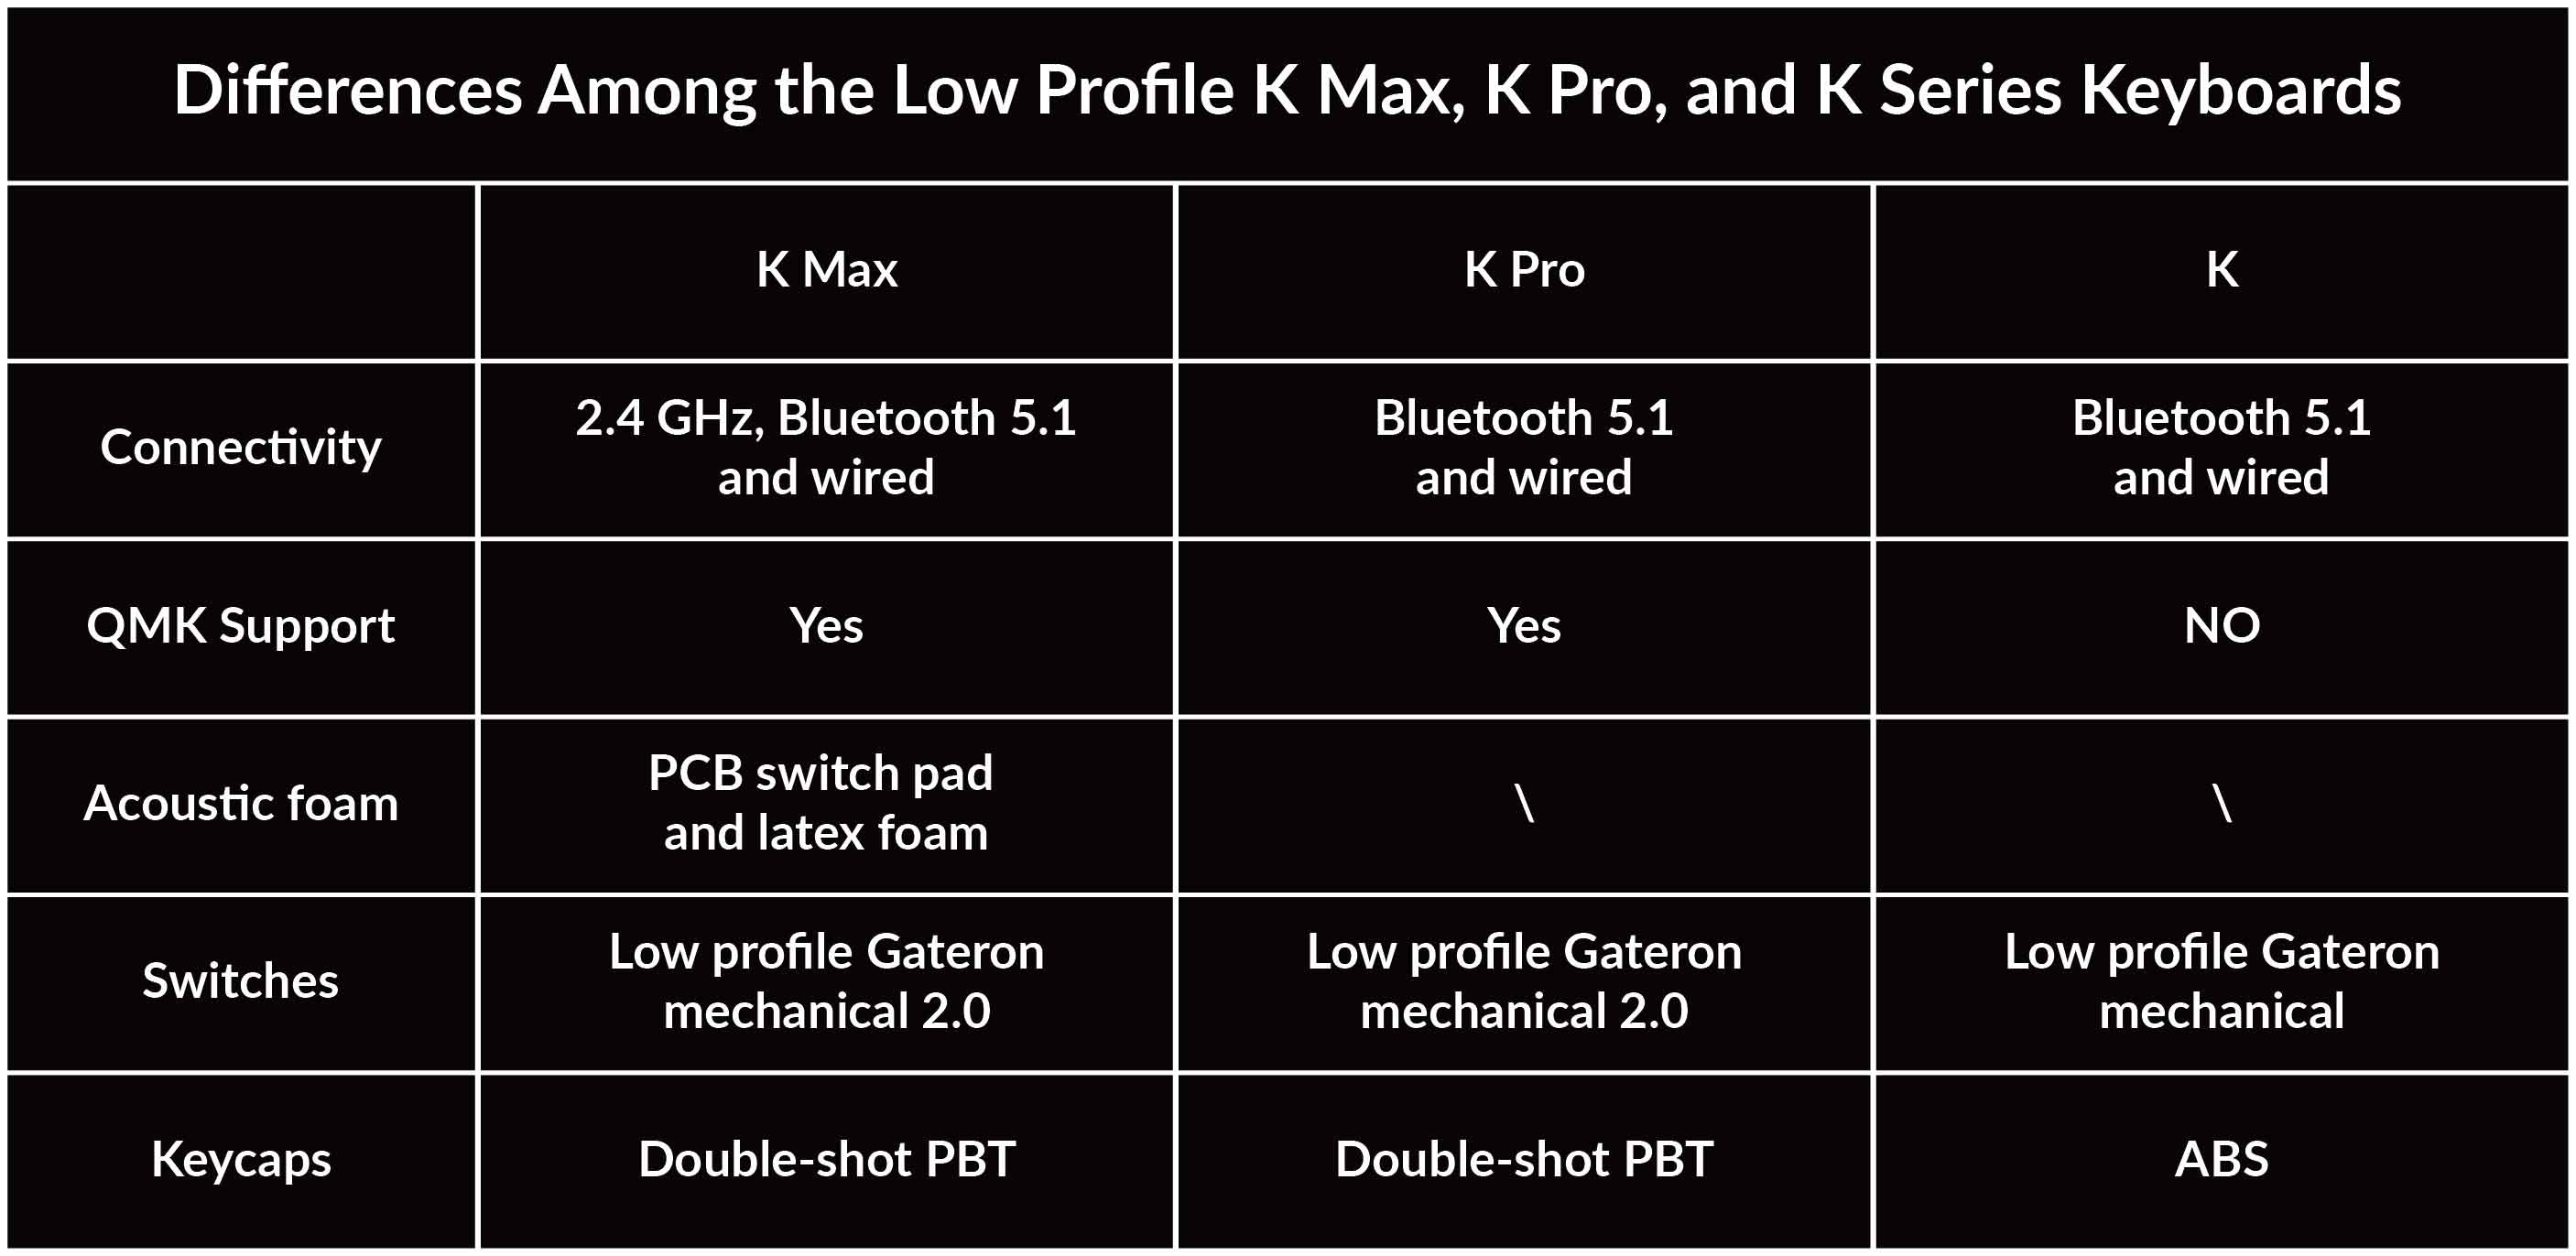 Differences among the low profile K Max, K Pro, and K series Keyboards